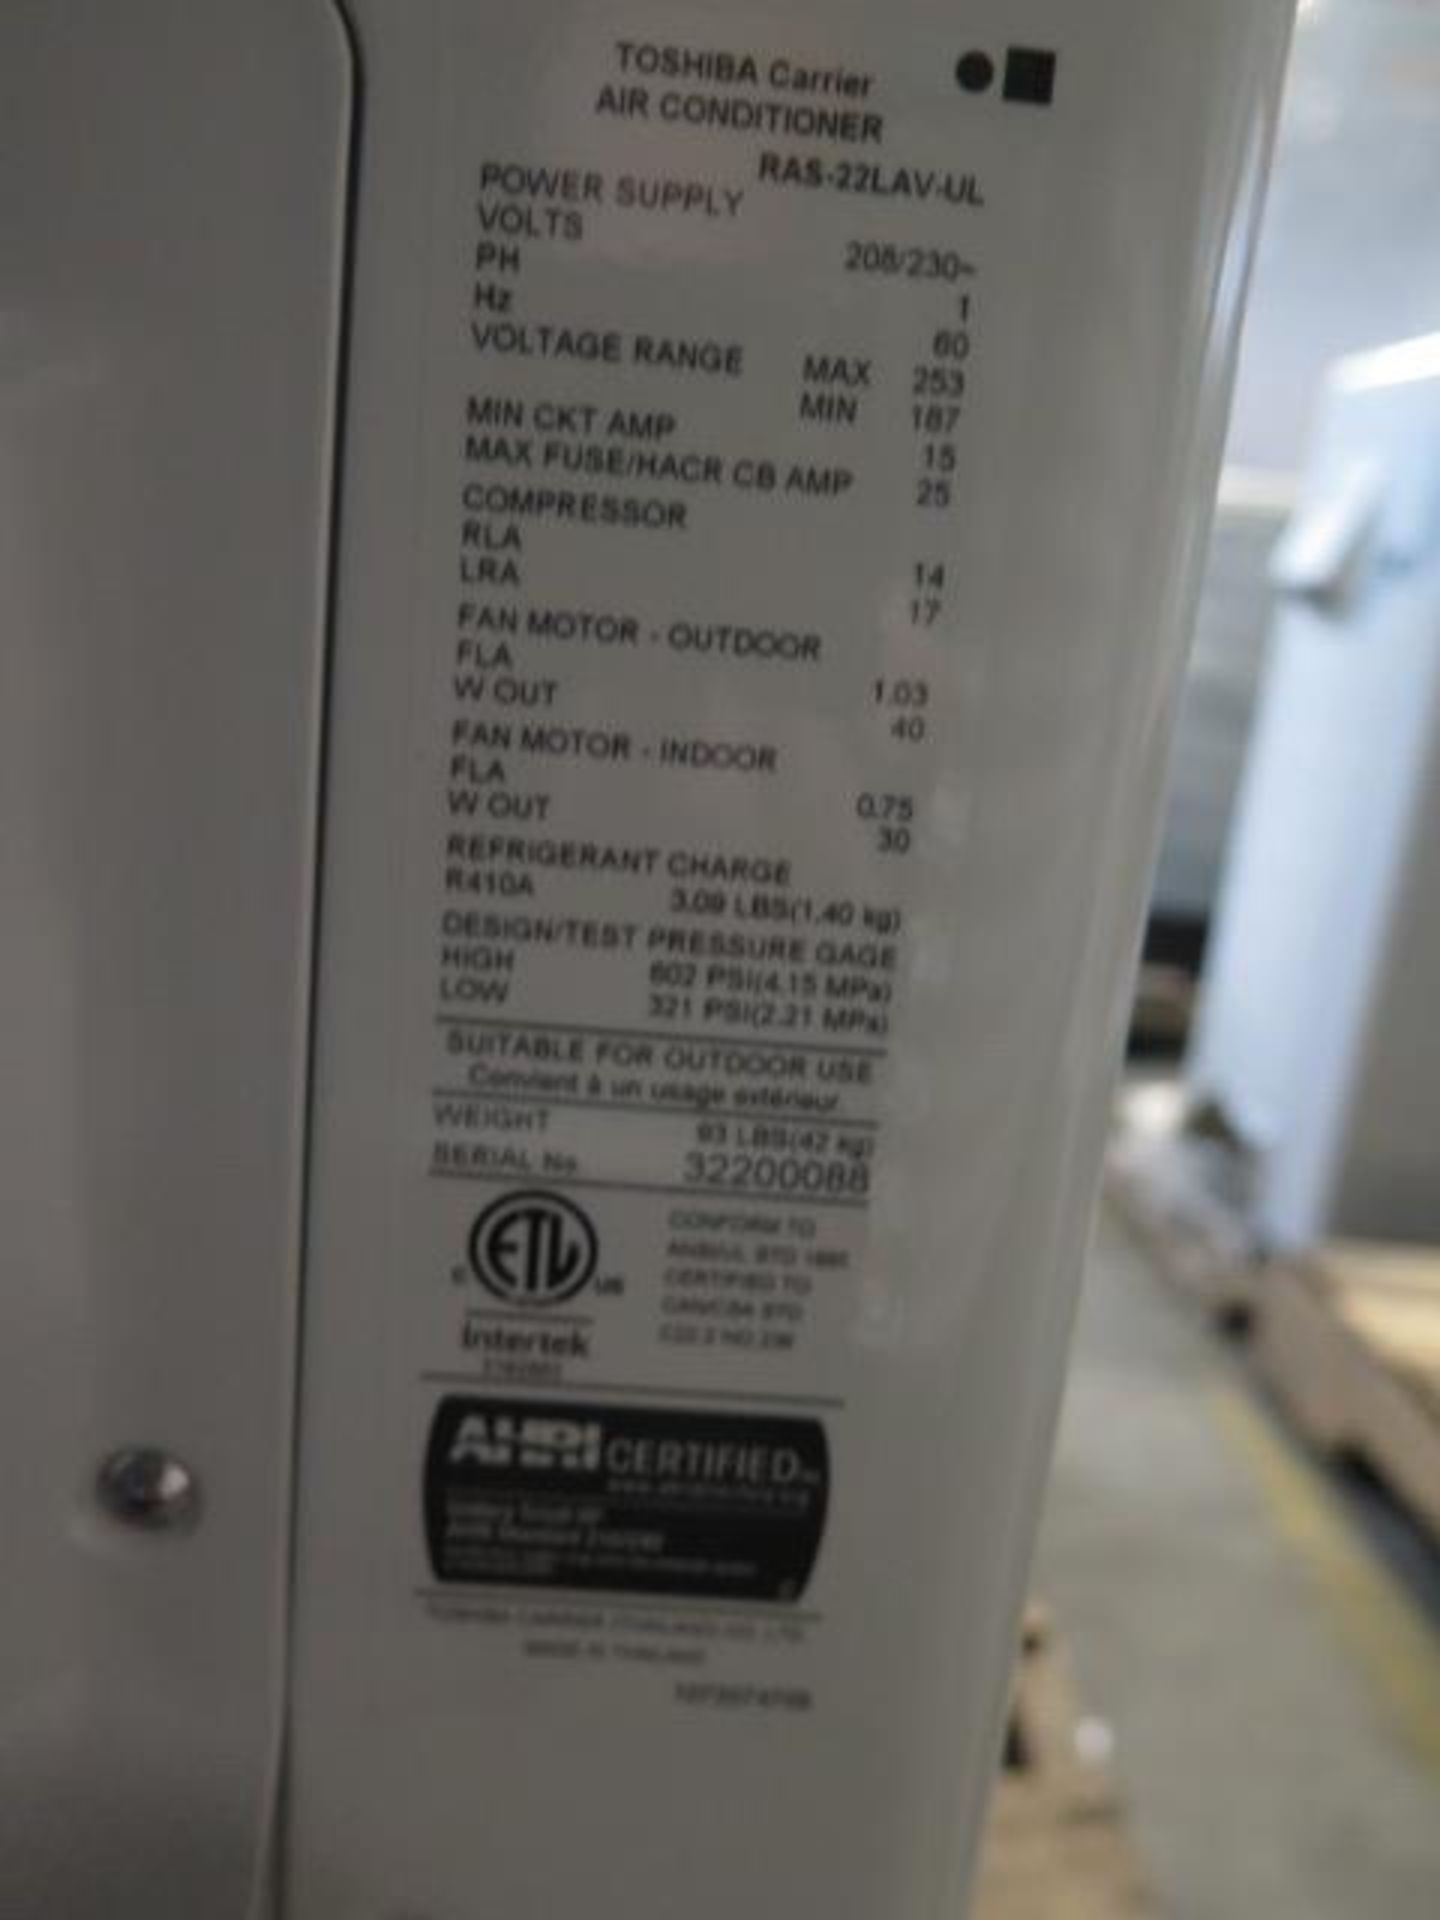 Toshiba / Carrier RAS-22LAV-UL Inverter Outdoor Units 208/230V-1PH. (SOLD AS-IS - NO WARRANTY) - Image 5 of 5